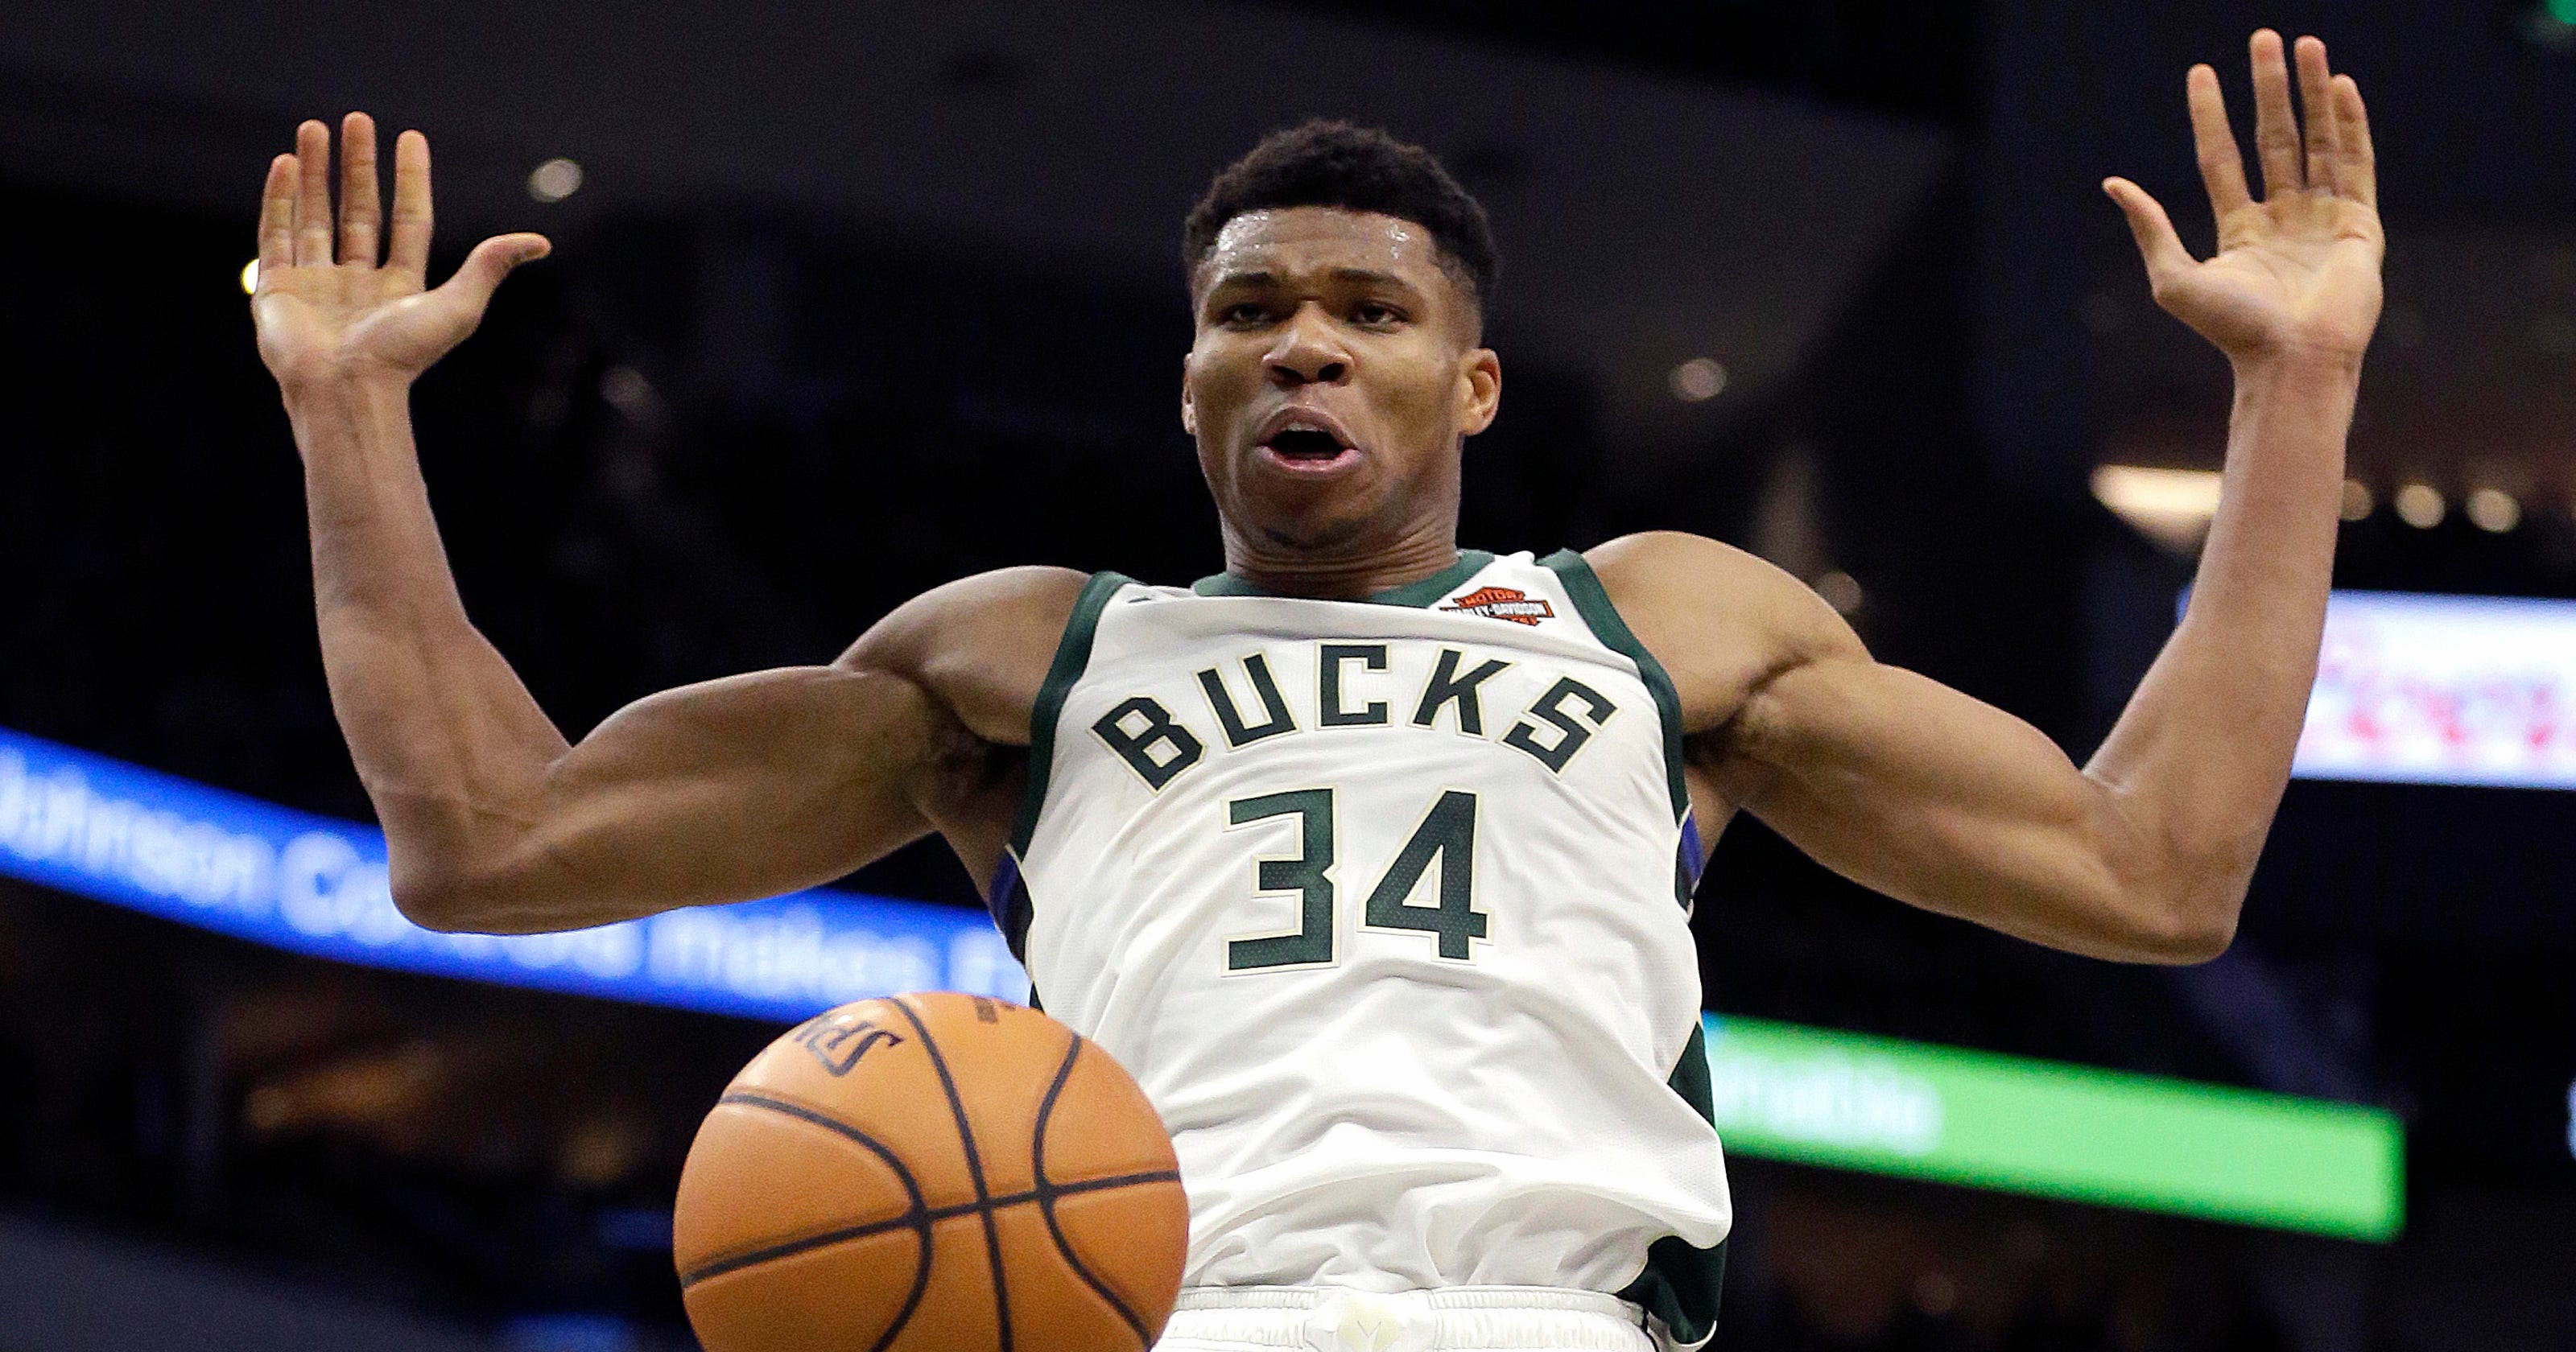 Giannis Antetokounmpo putting up big numbers, but just getting started